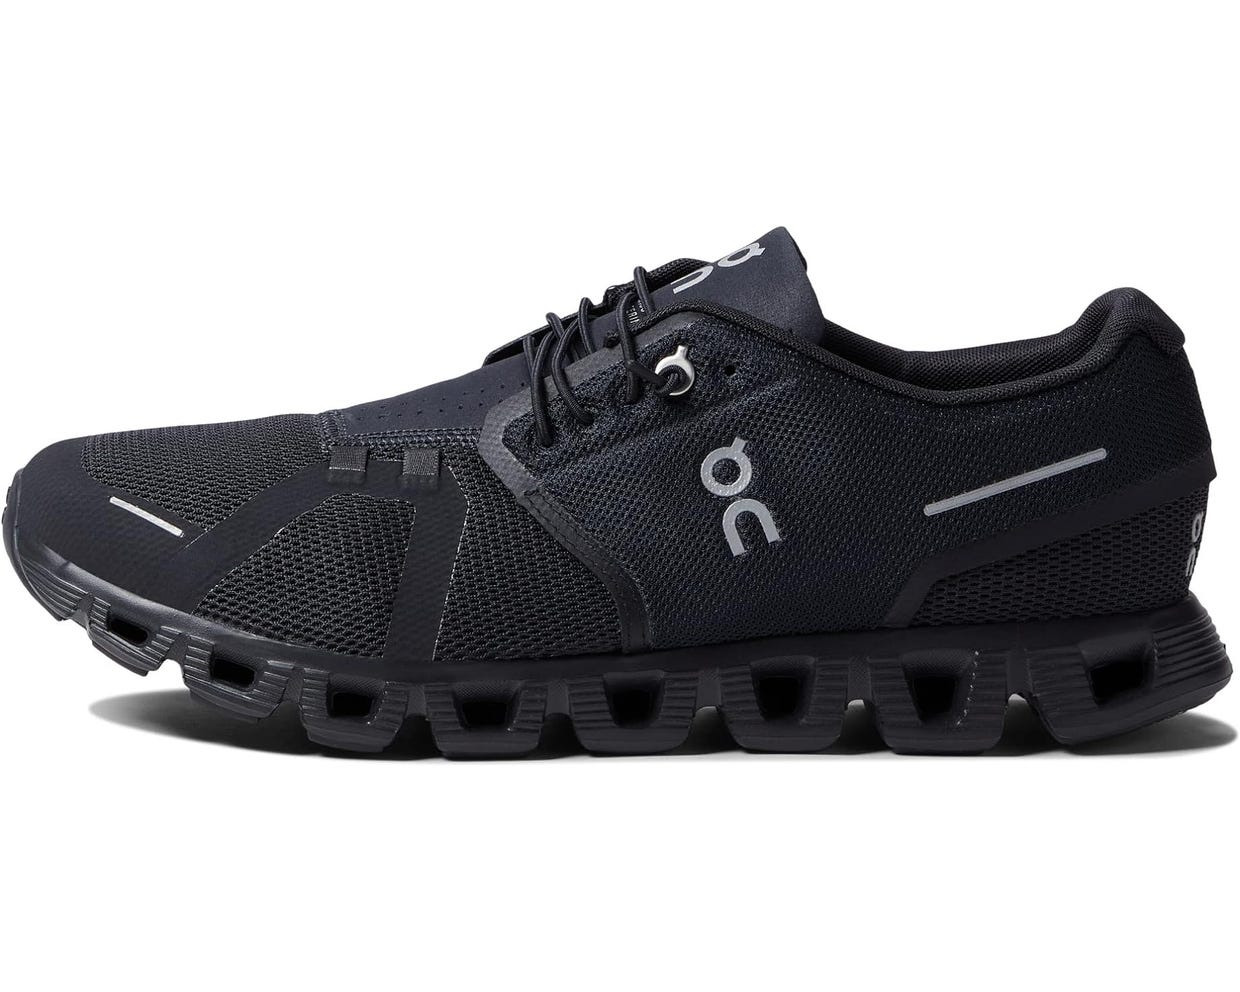 A single black running shoe with distinctive hollowed-out soles.